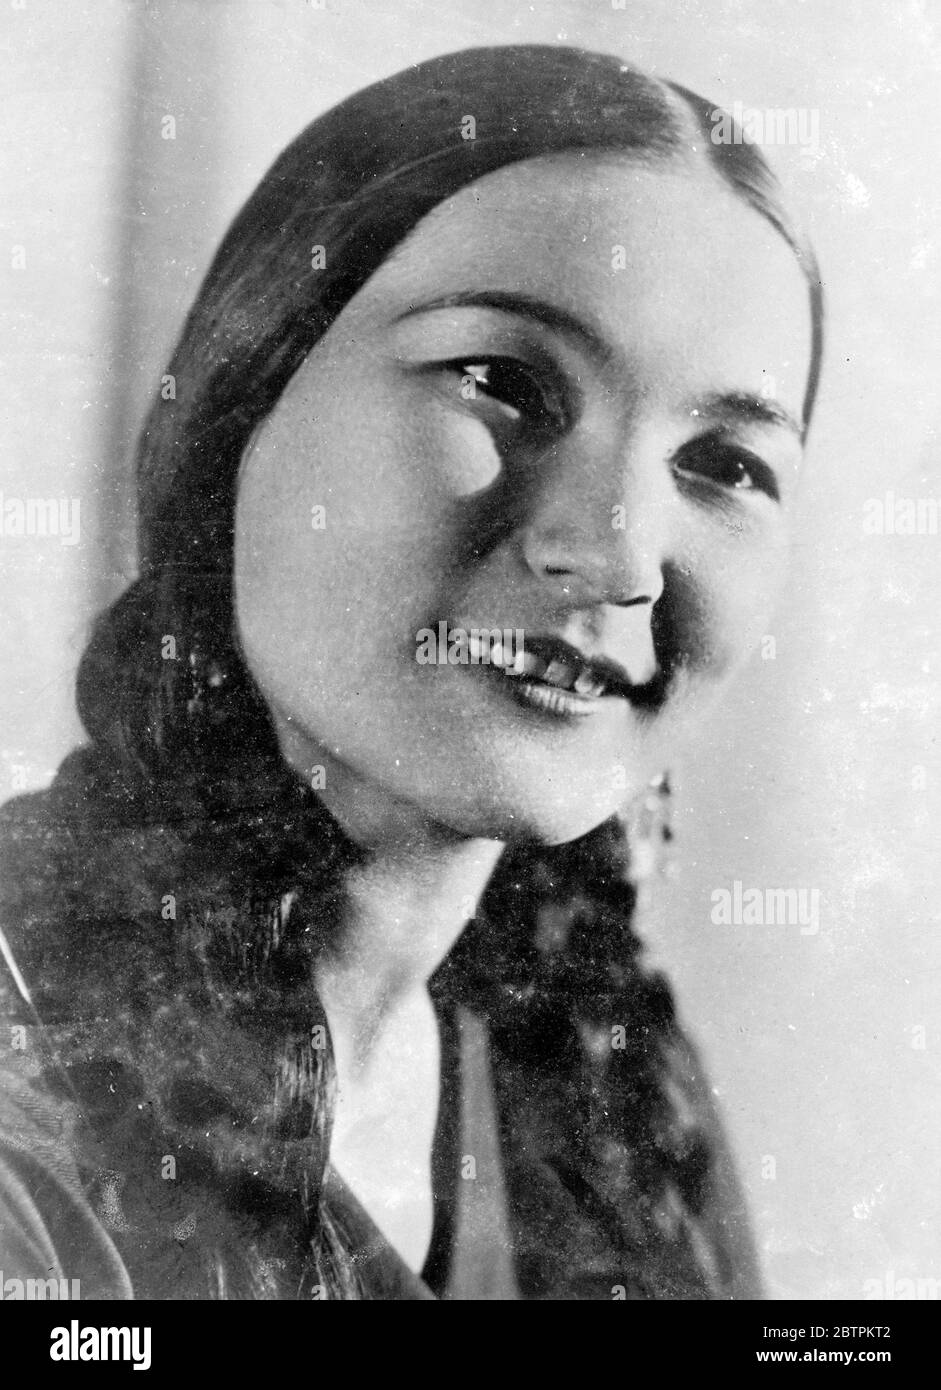 Smiling Beauty Of The East Smooth , oval features , dark eyes and reven hair draping graceful shoulders - this is the picture of Shara Zhandarbekova , agreed by experts to be a typical Kazakh beauty of Asiatic Russia . She has been trained as ballet dancer and is now drawing crowded audiences to the Kazakh State Musical Theatre . 2 Jun 1936 Stock Photo